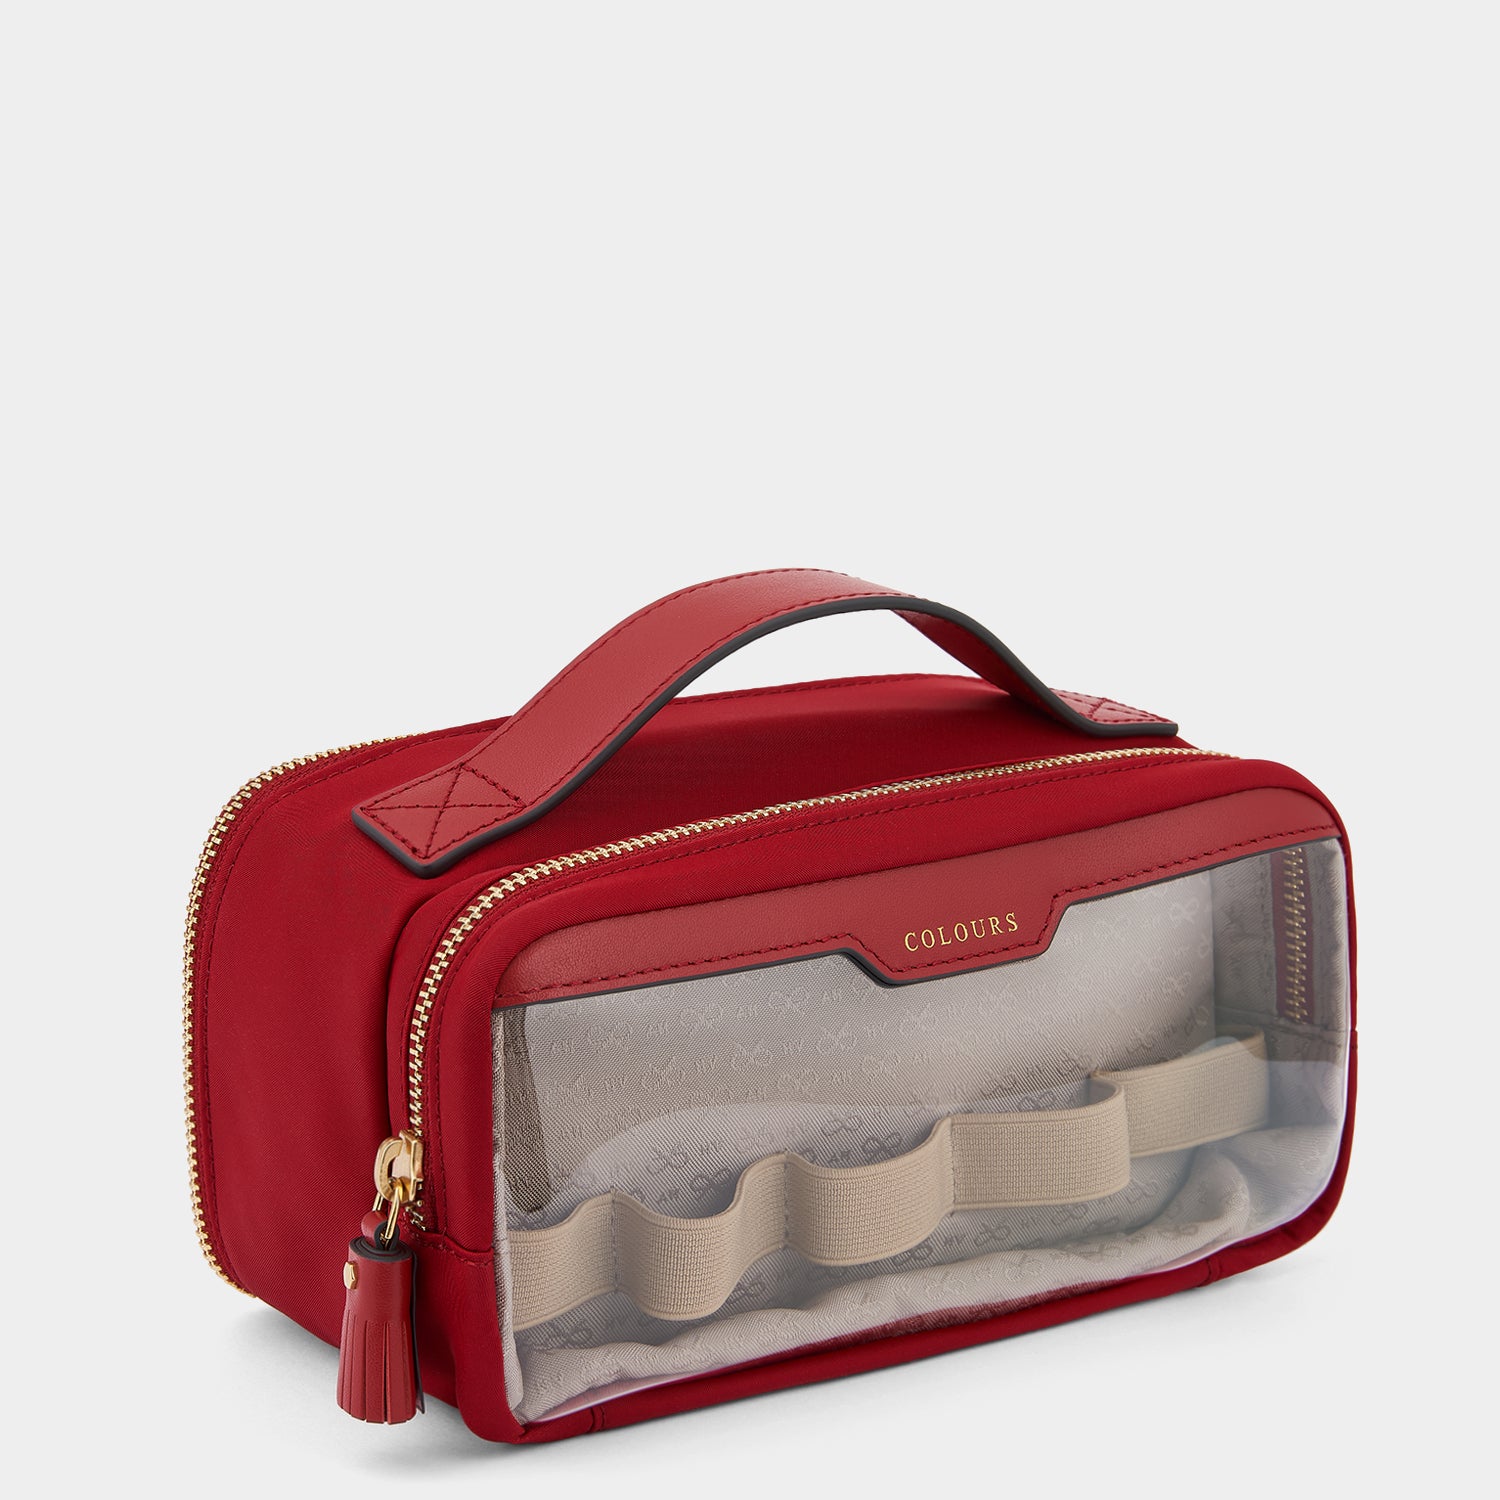 Nails Kit -

                  
                    Recycled Nylon in Red -
                  

                  Anya Hindmarch UK
